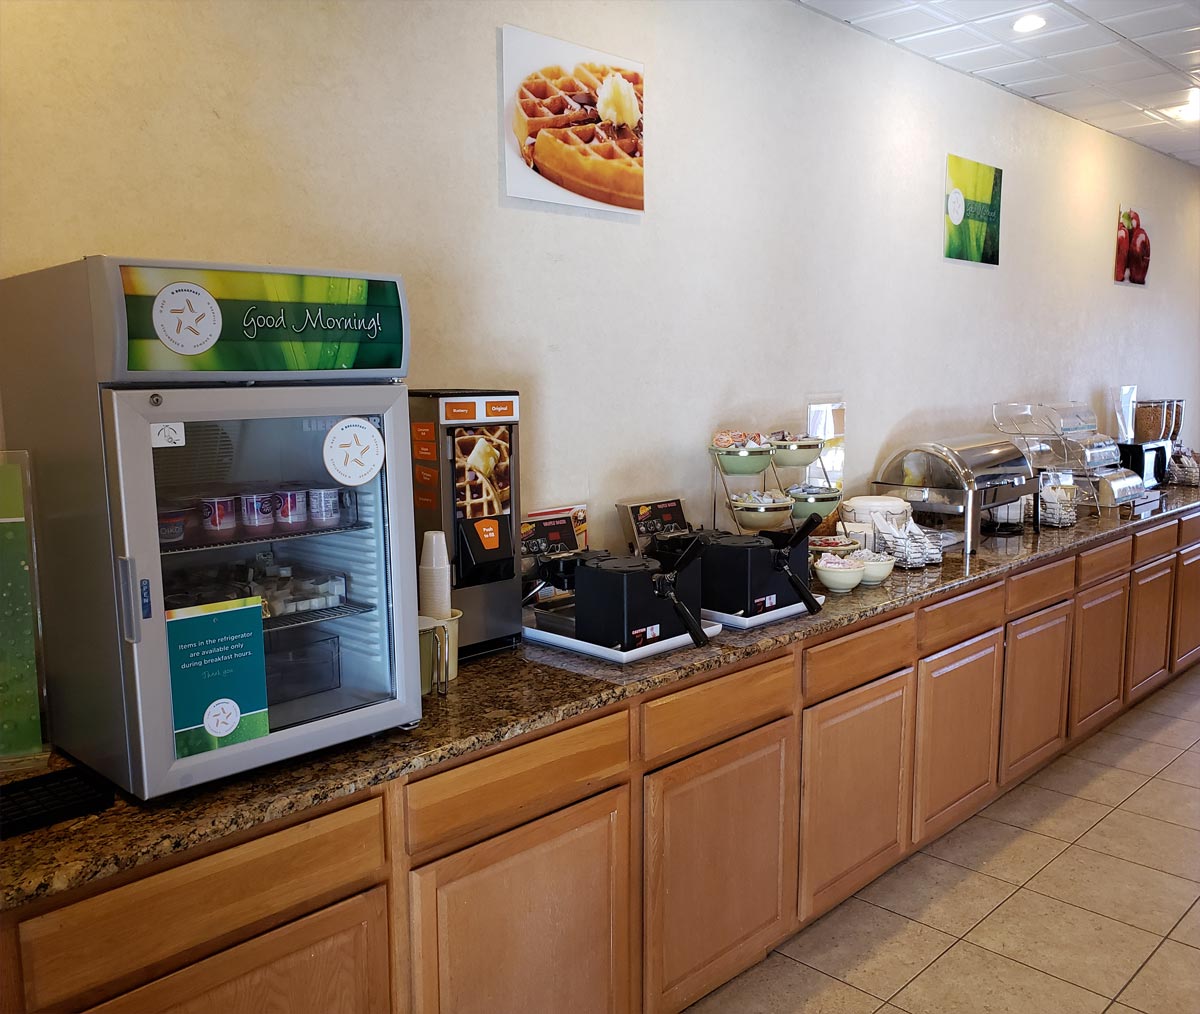 Counter with coffee, tea, and breakfast items